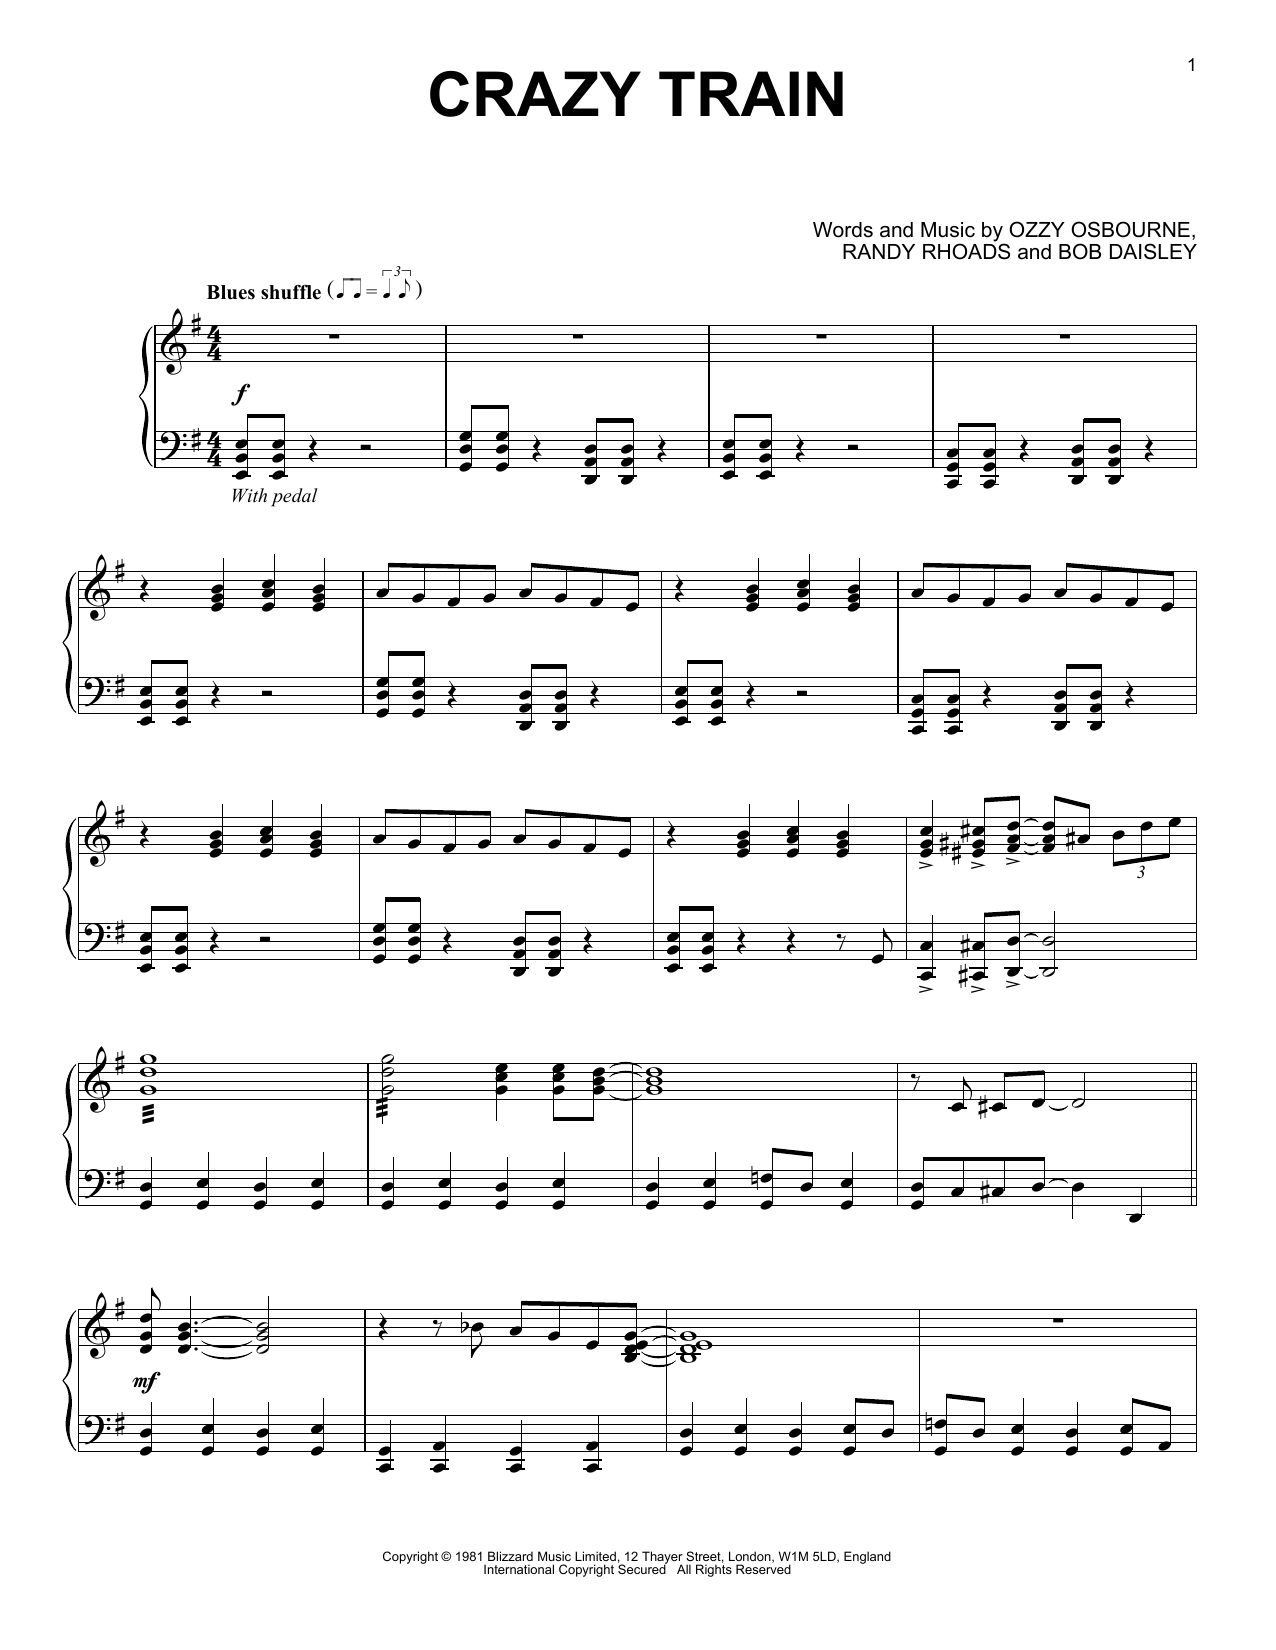 Ozzy Osbourne "Crazy Train" Sheet Music Notes, Chords | Piano Download